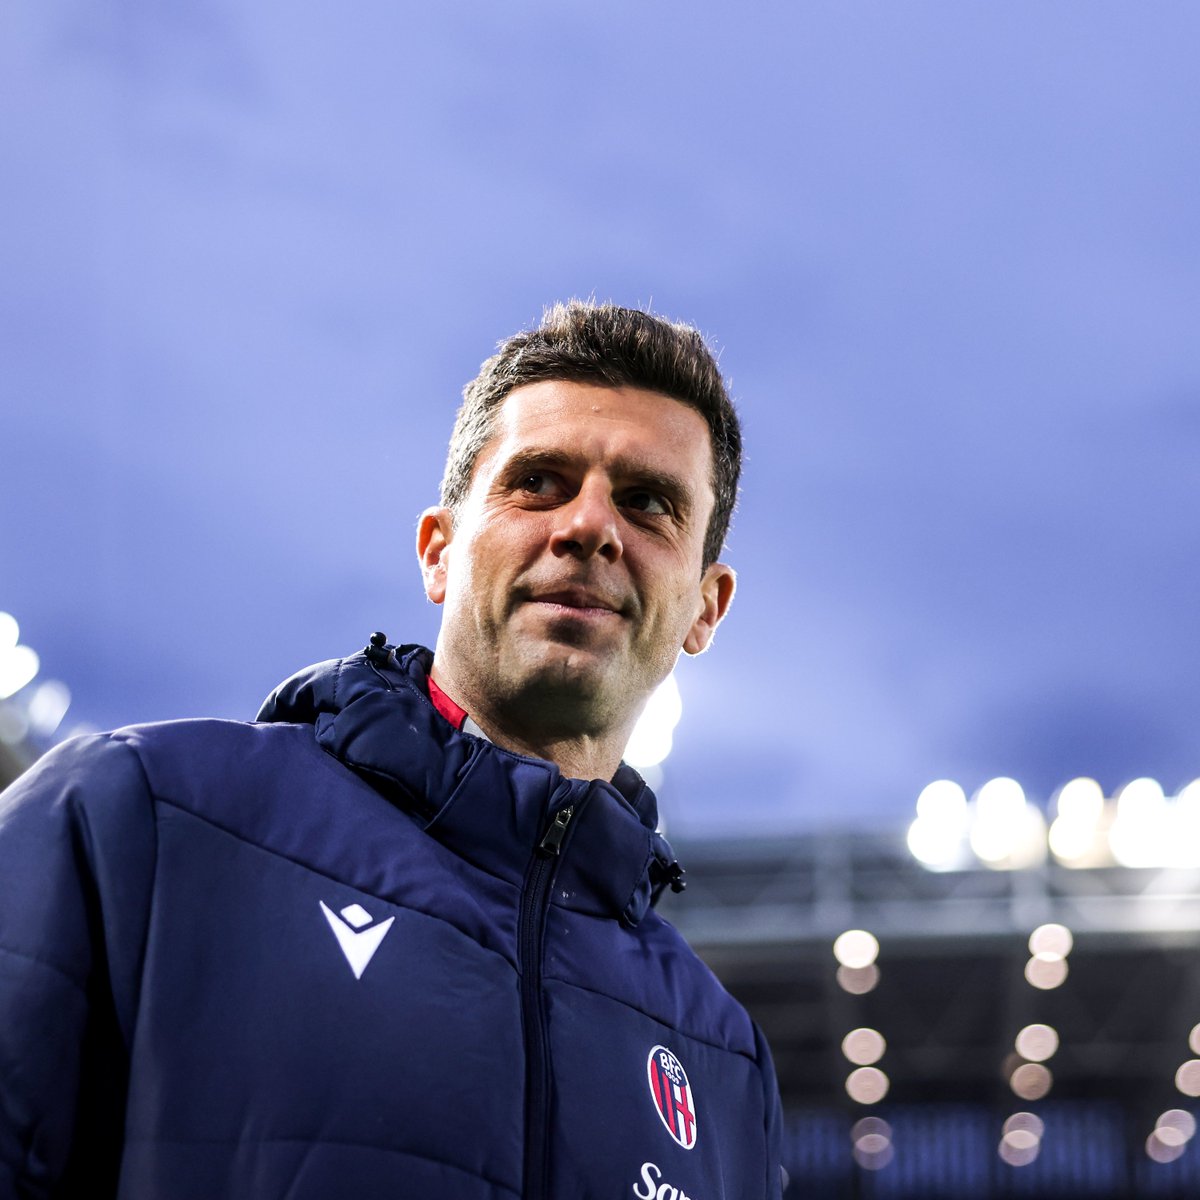 Bologna secured a European place for the first time in 22 years, and they could clinch a Champions League spot. Their record under Thiago Motta this season: ▪️ 4th in the league ▪️ 17W, 12D, 5L ▪️ 15 clean sheets ✨